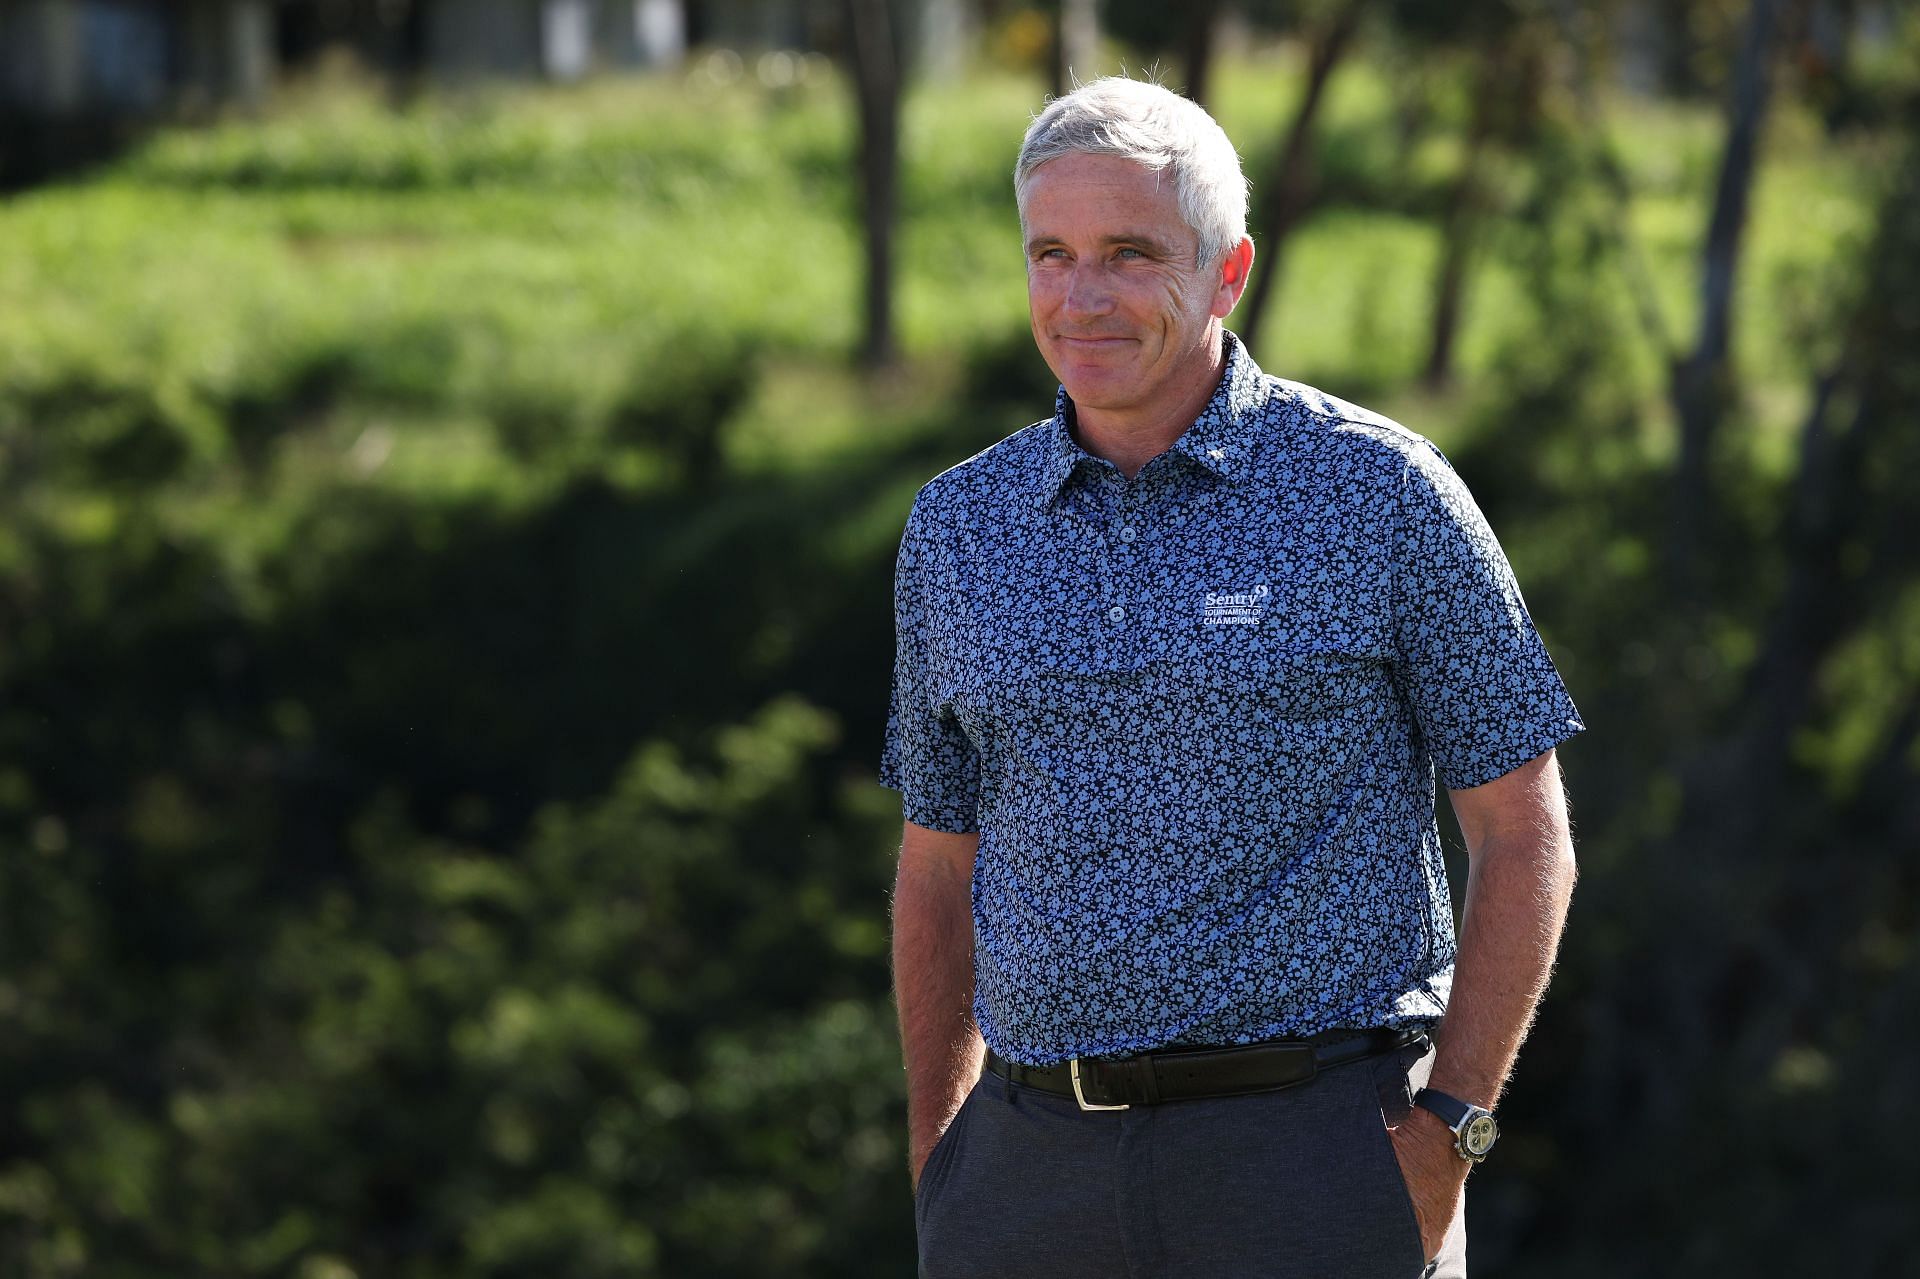 Jay Monahan at the Sentry Tournament of Champions - Final Round (Image via Getty).